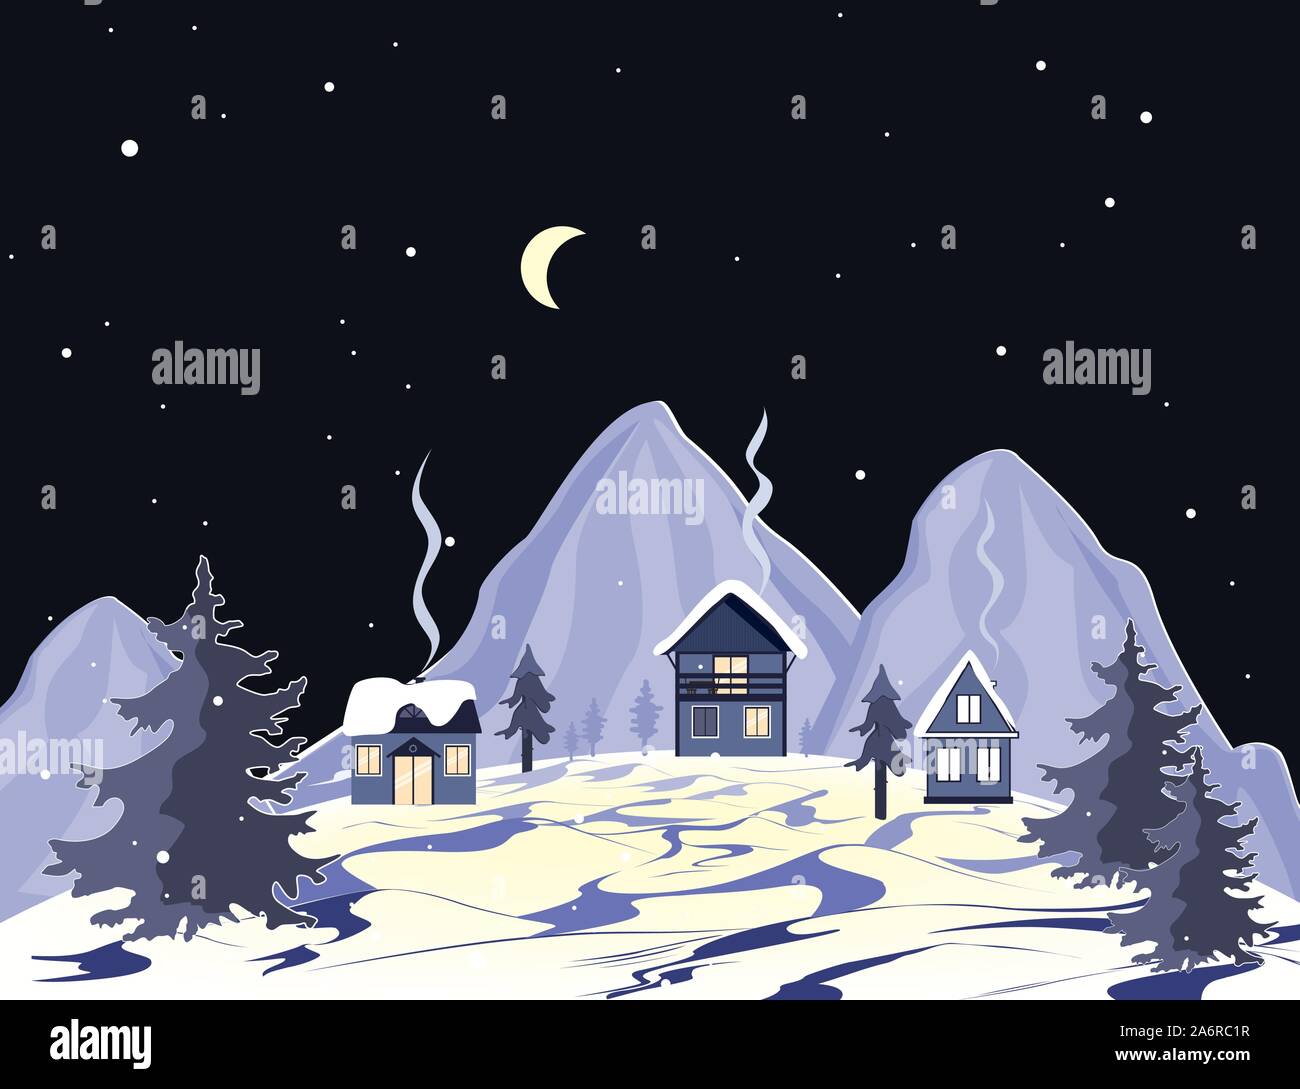 Cartoon mountains landscape with houses and trees at night. Perfect for cards, invitations, wallpaper, banners, children room decoration. Vector Stock Vector